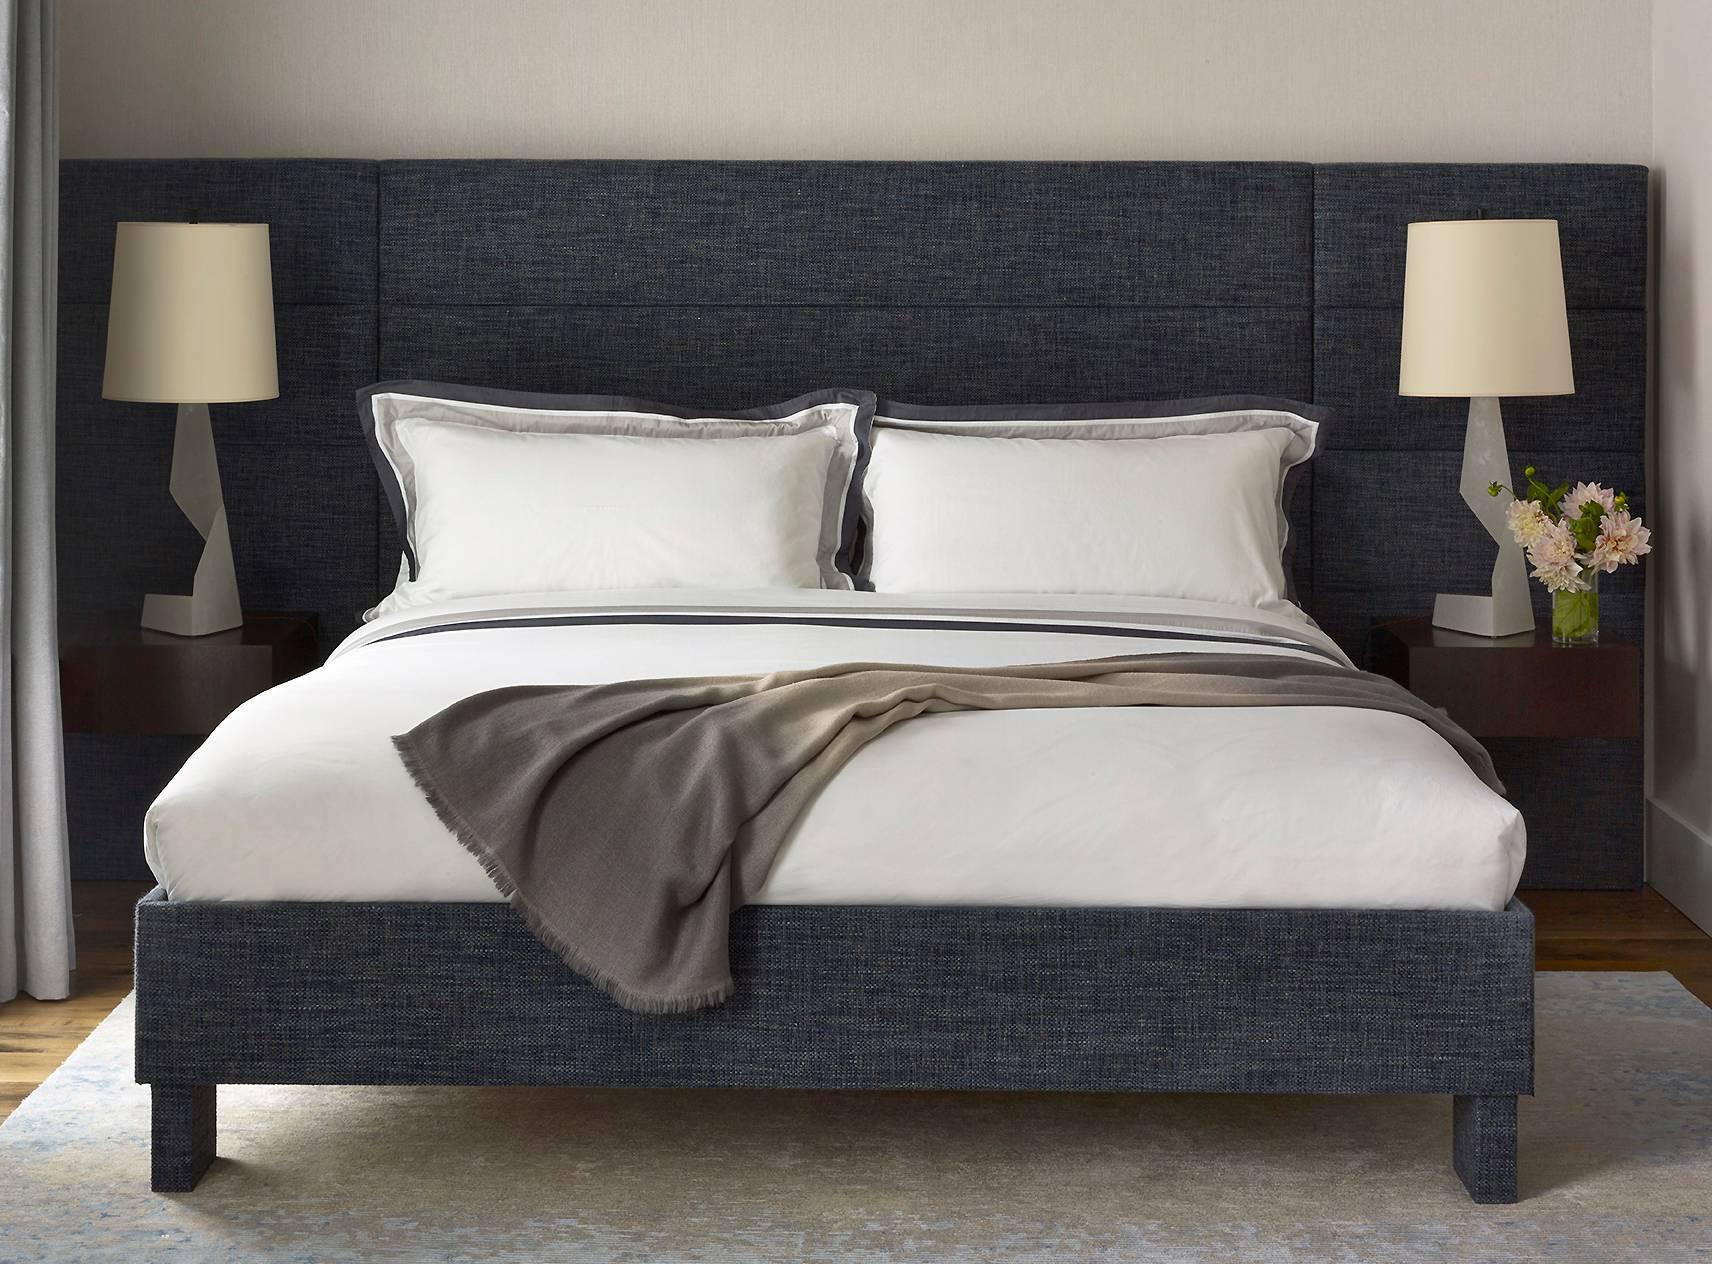 The 'Leonardo' bed is a linear architectural inspired platform bed, perfect for a room with minimal space. The American maple floating side tables with drawers make the perfect nightstand alternative and are available in three finishes. Bed requires